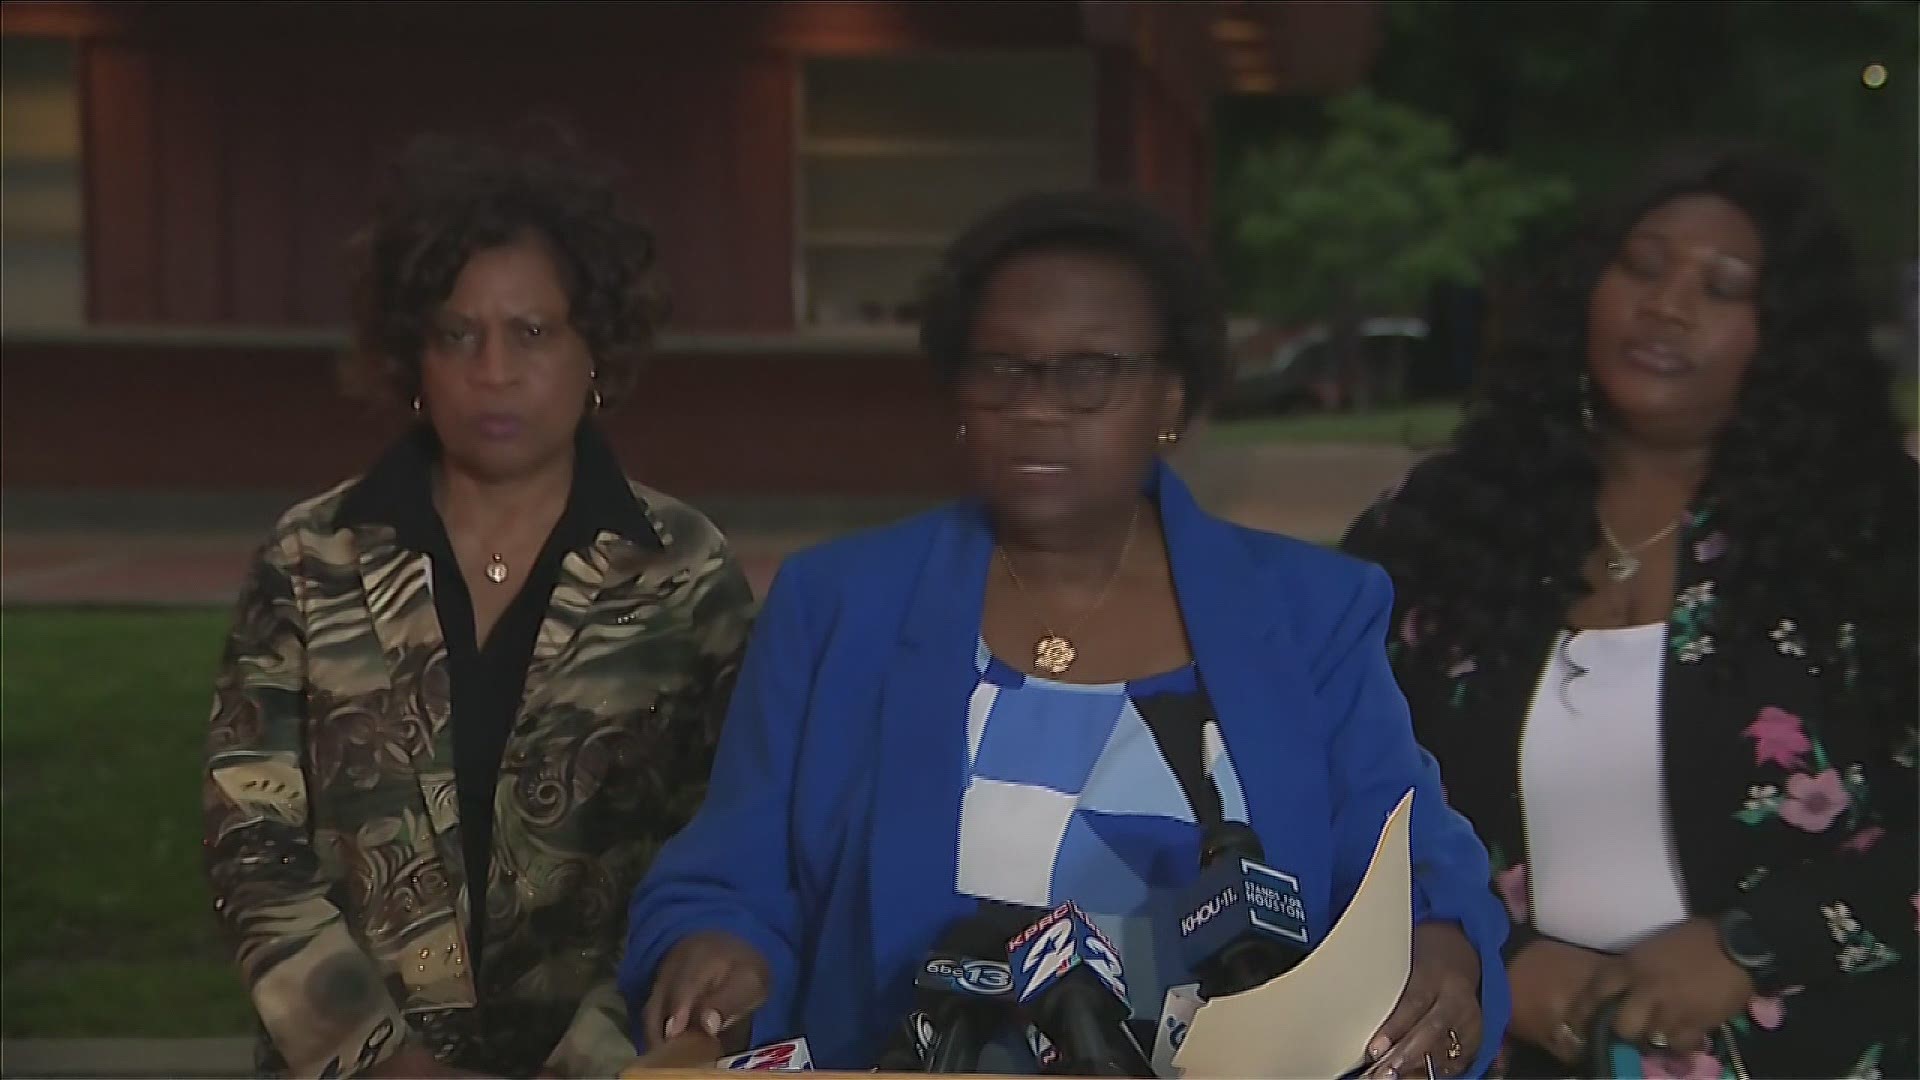 Here's what James Byrd Jr's family had to say after John William King's execution.